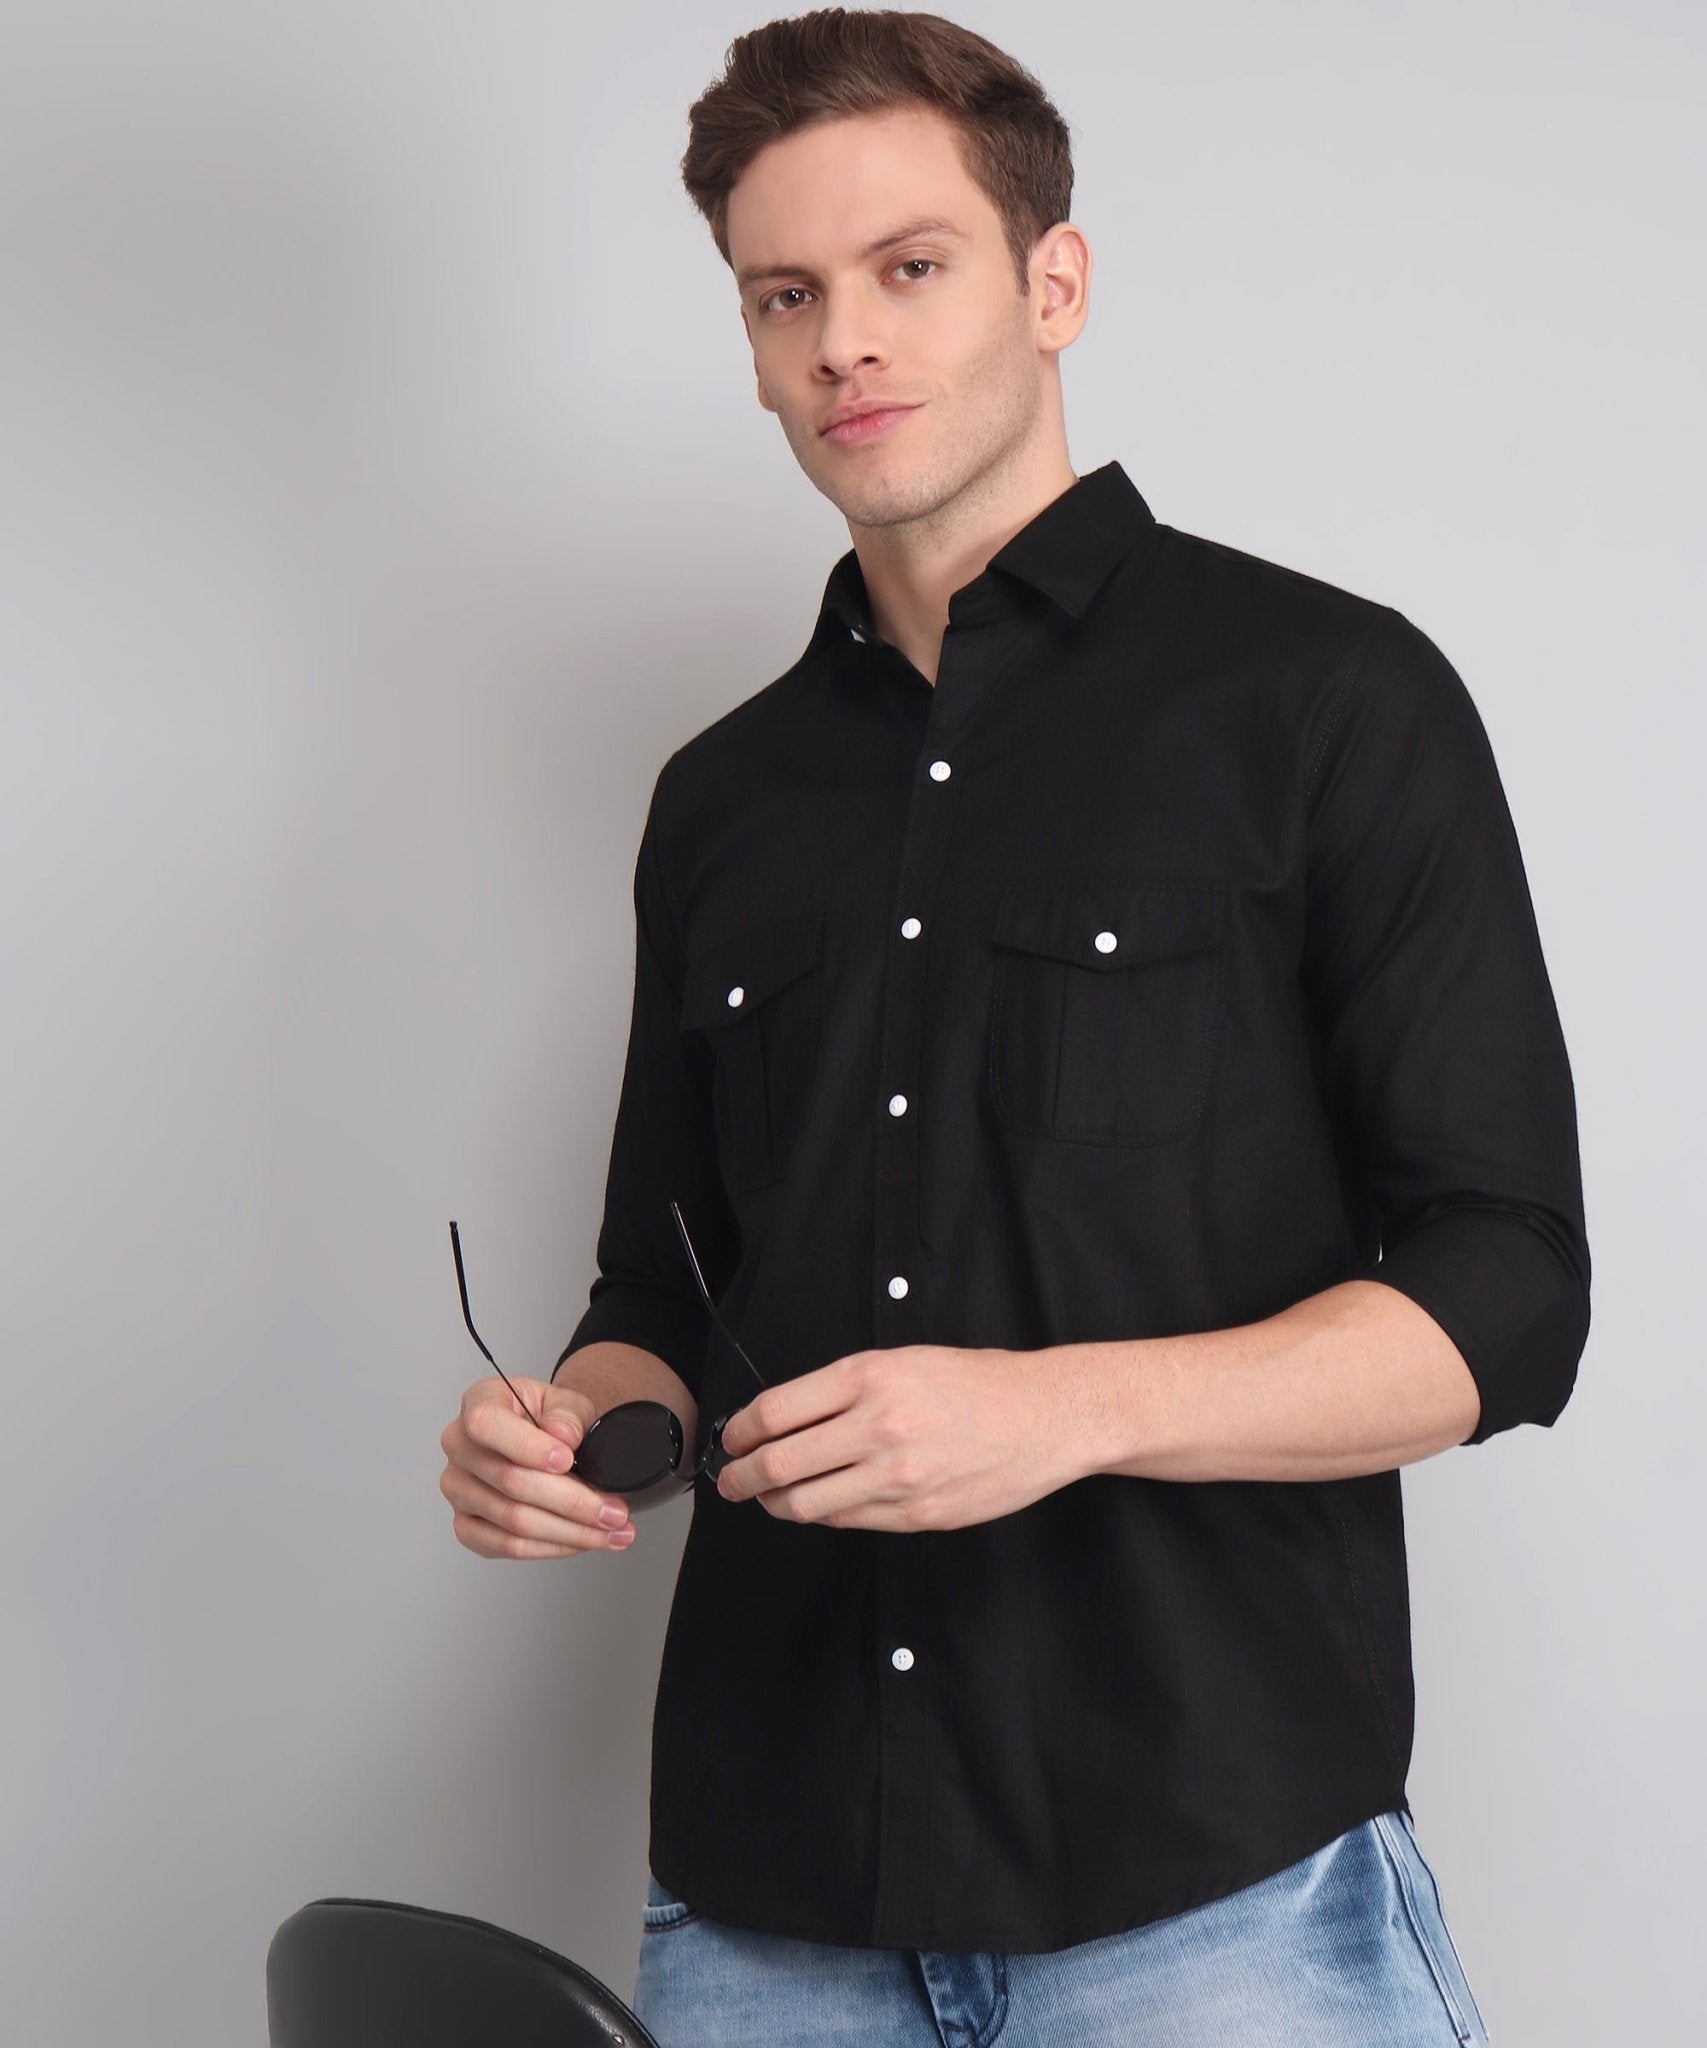 TryBuy Premium Black Solid Cotton Linen Casual Double Pocket Shirt for Men - TryBuy® USA🇺🇸